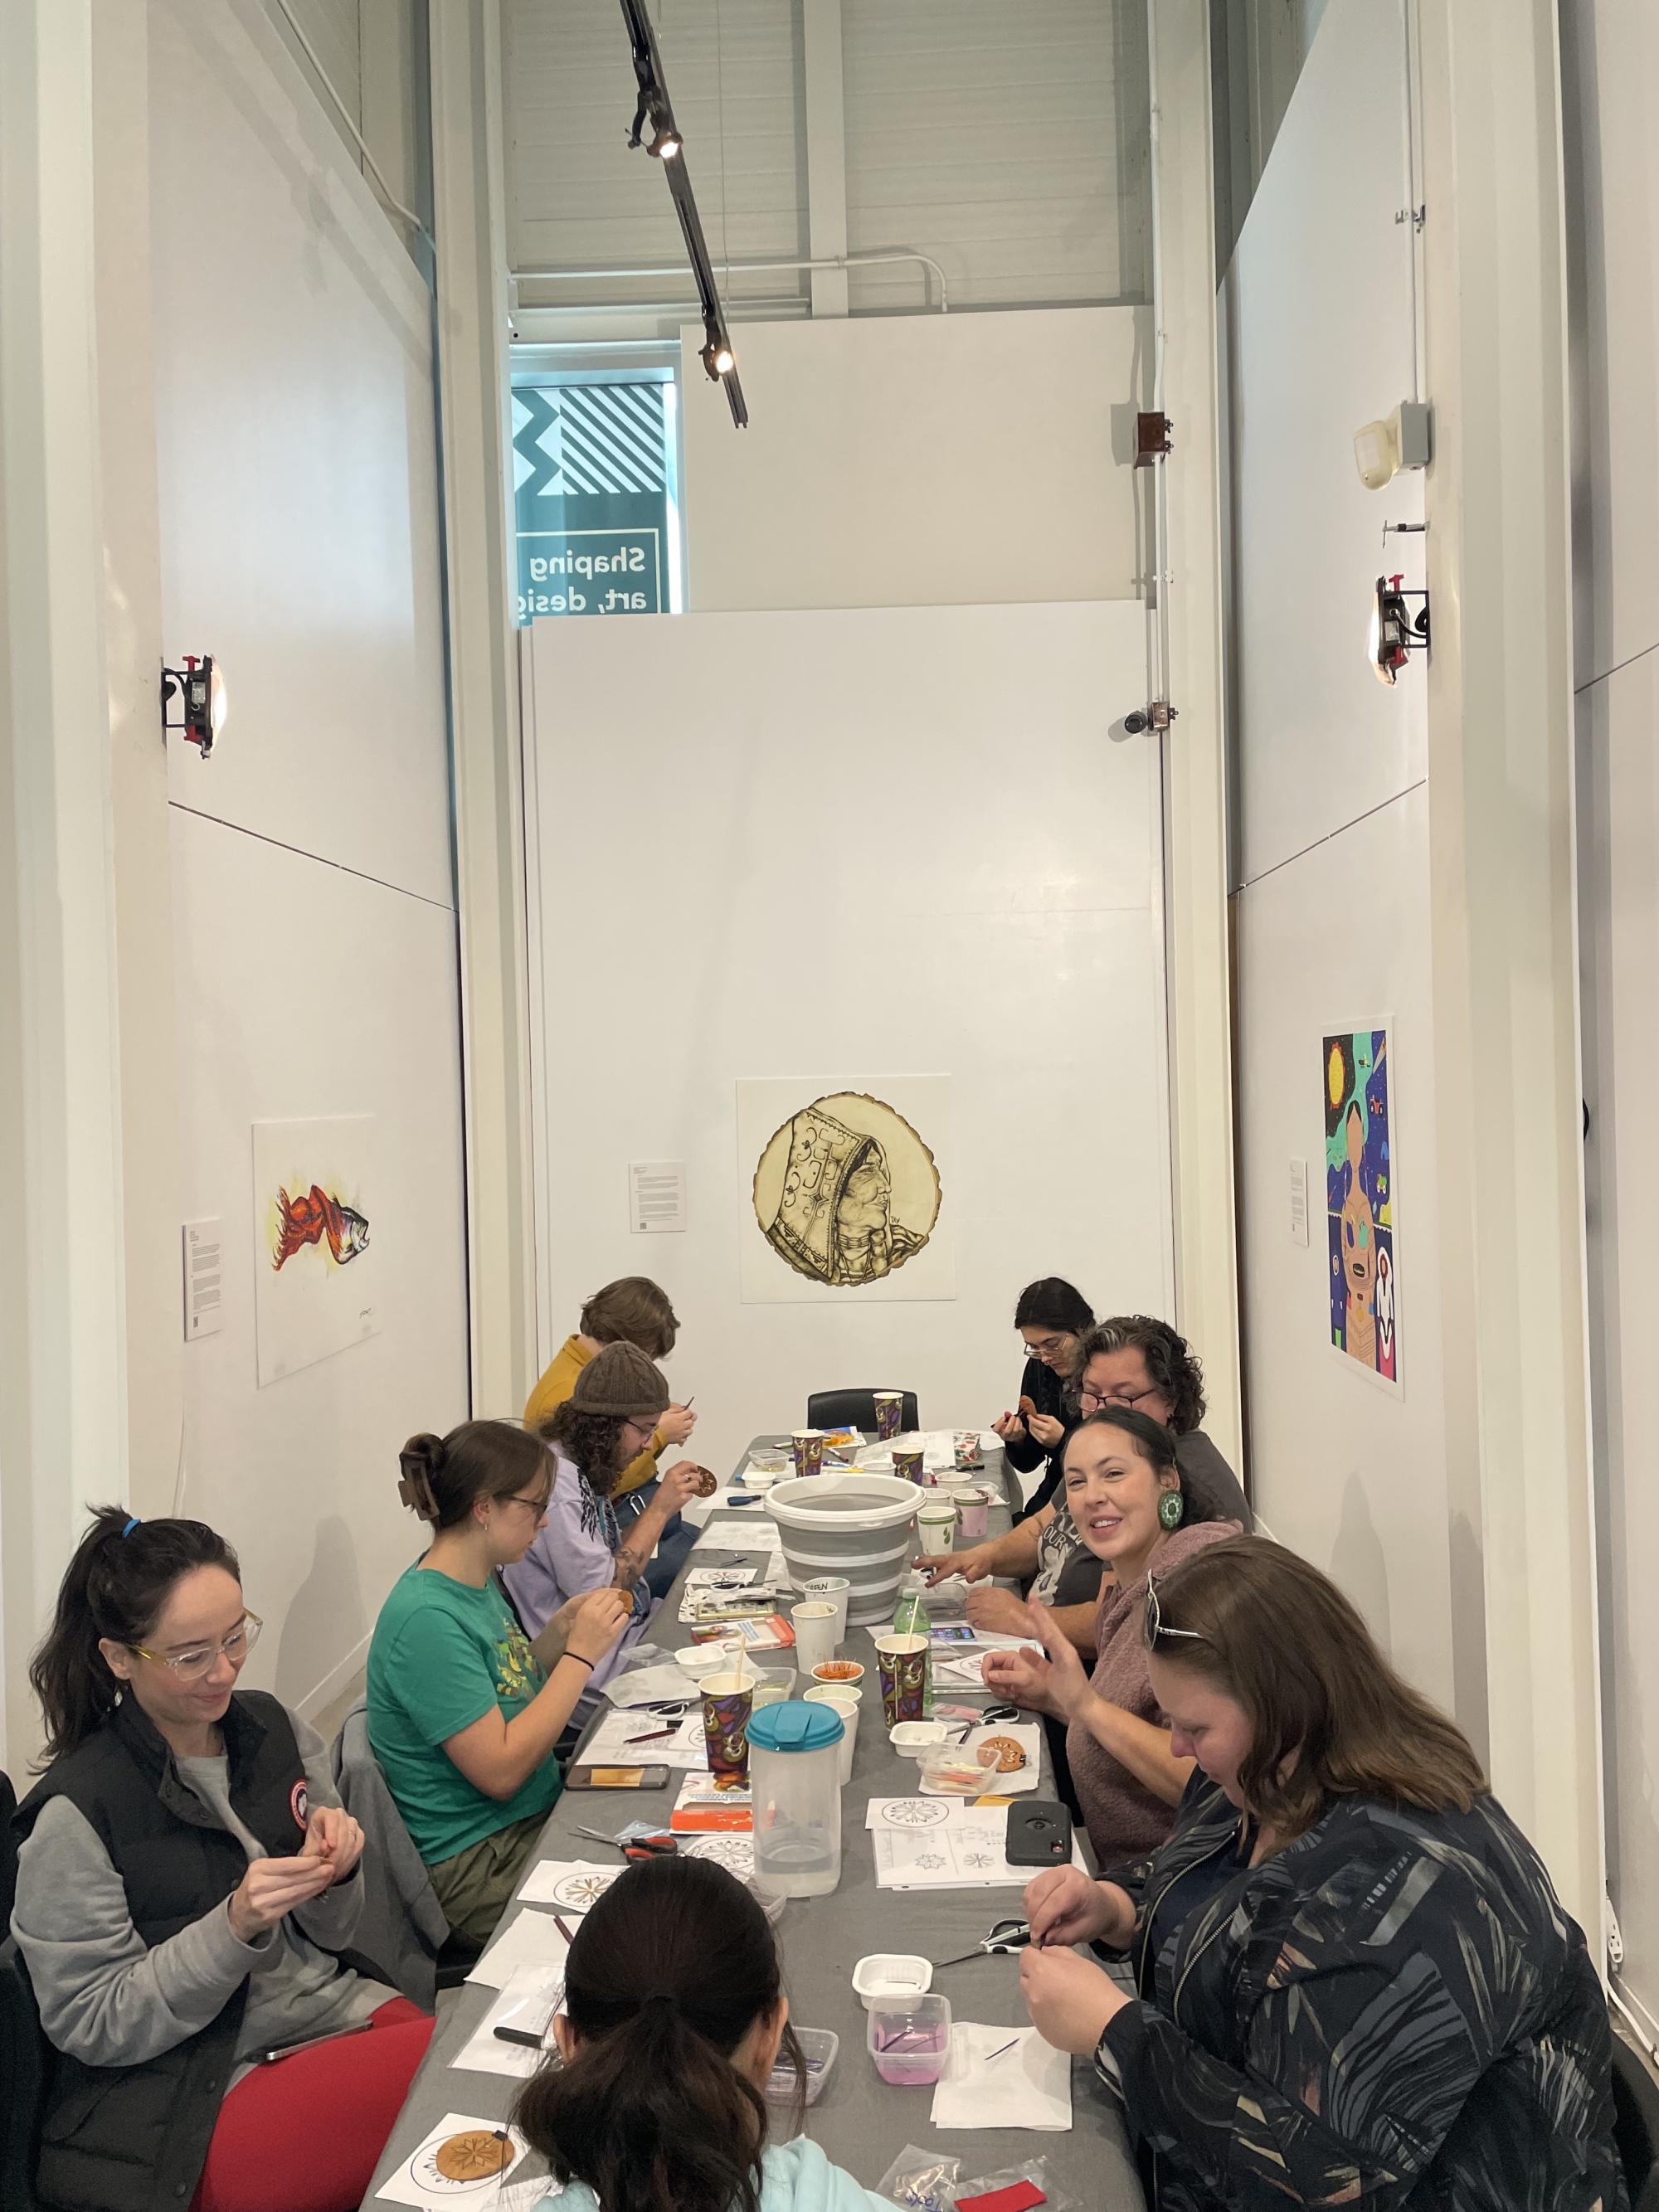 [ID: "Porcupine quill workshop participants working on their medallions at a long table in the Treaty Space Gallery."]